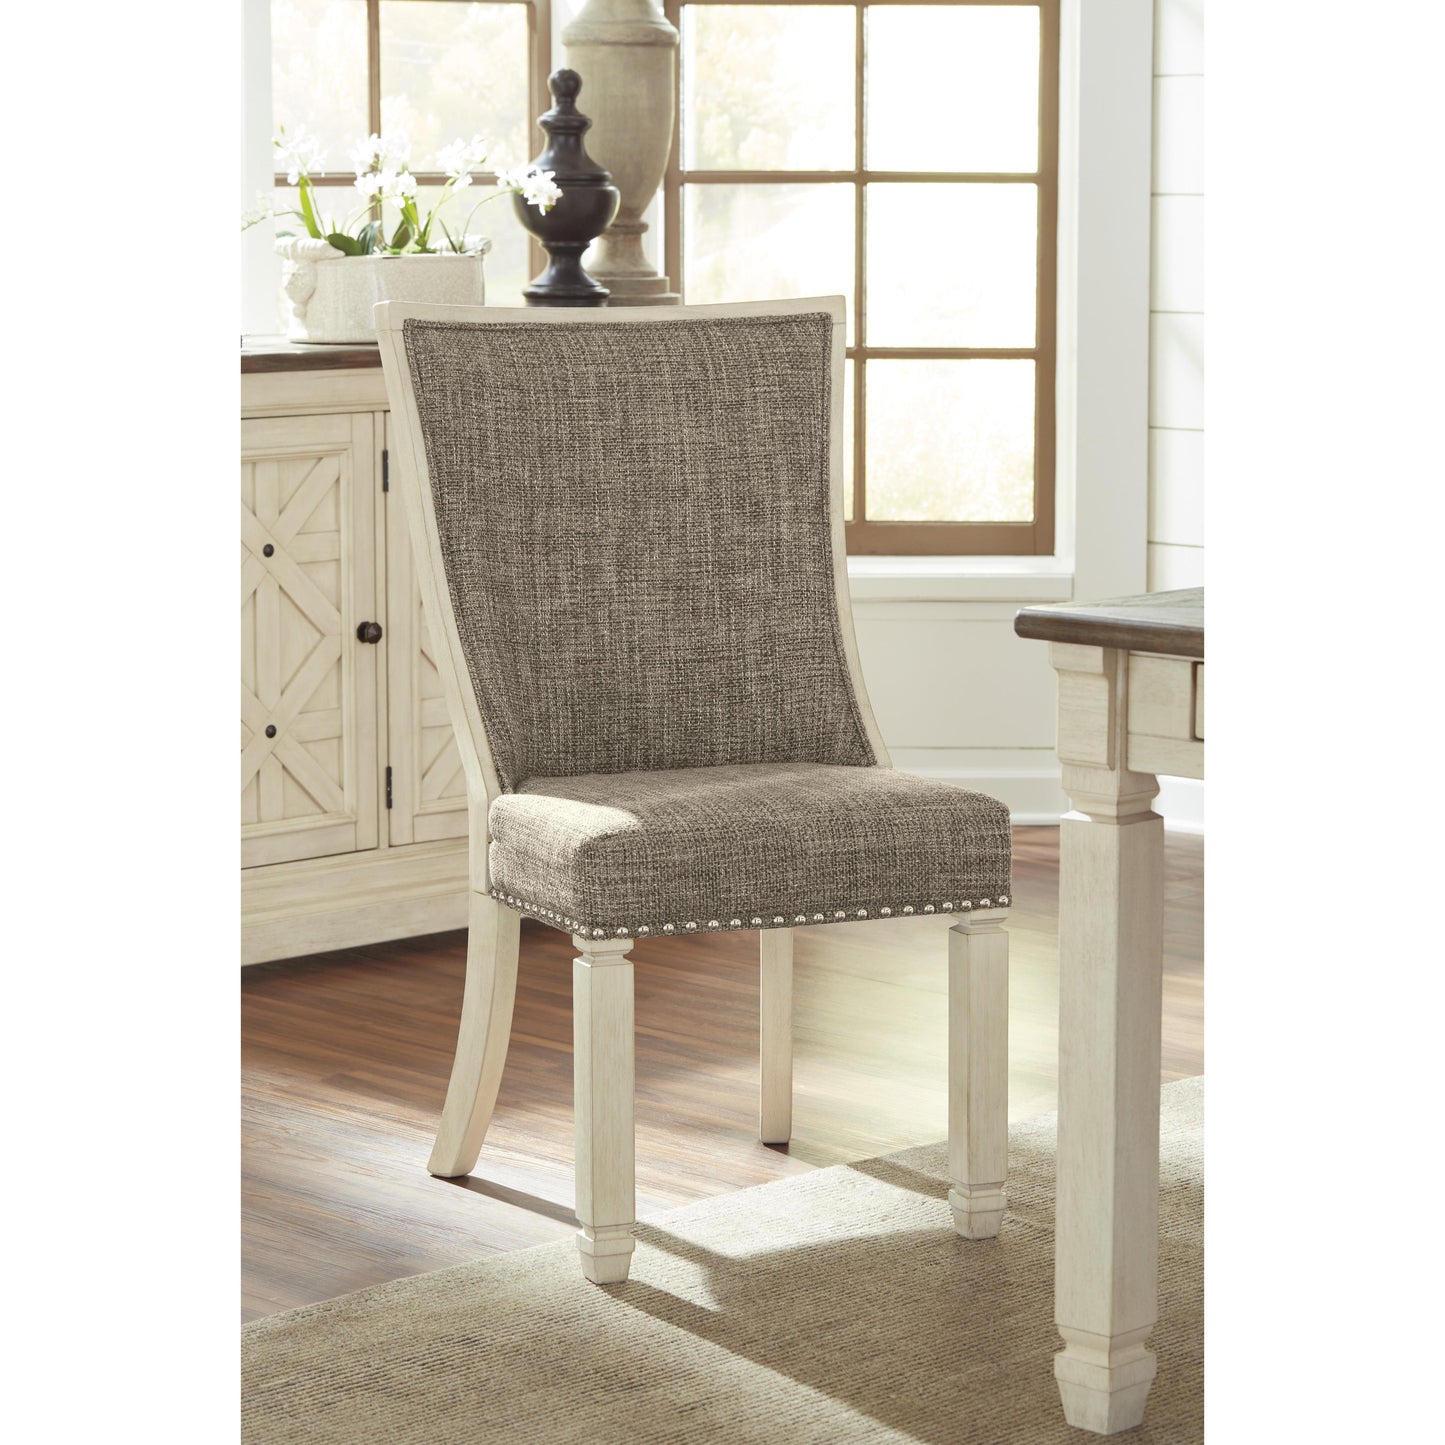 Signature Design by Ashley Bolanburg Dining Chair D647-02